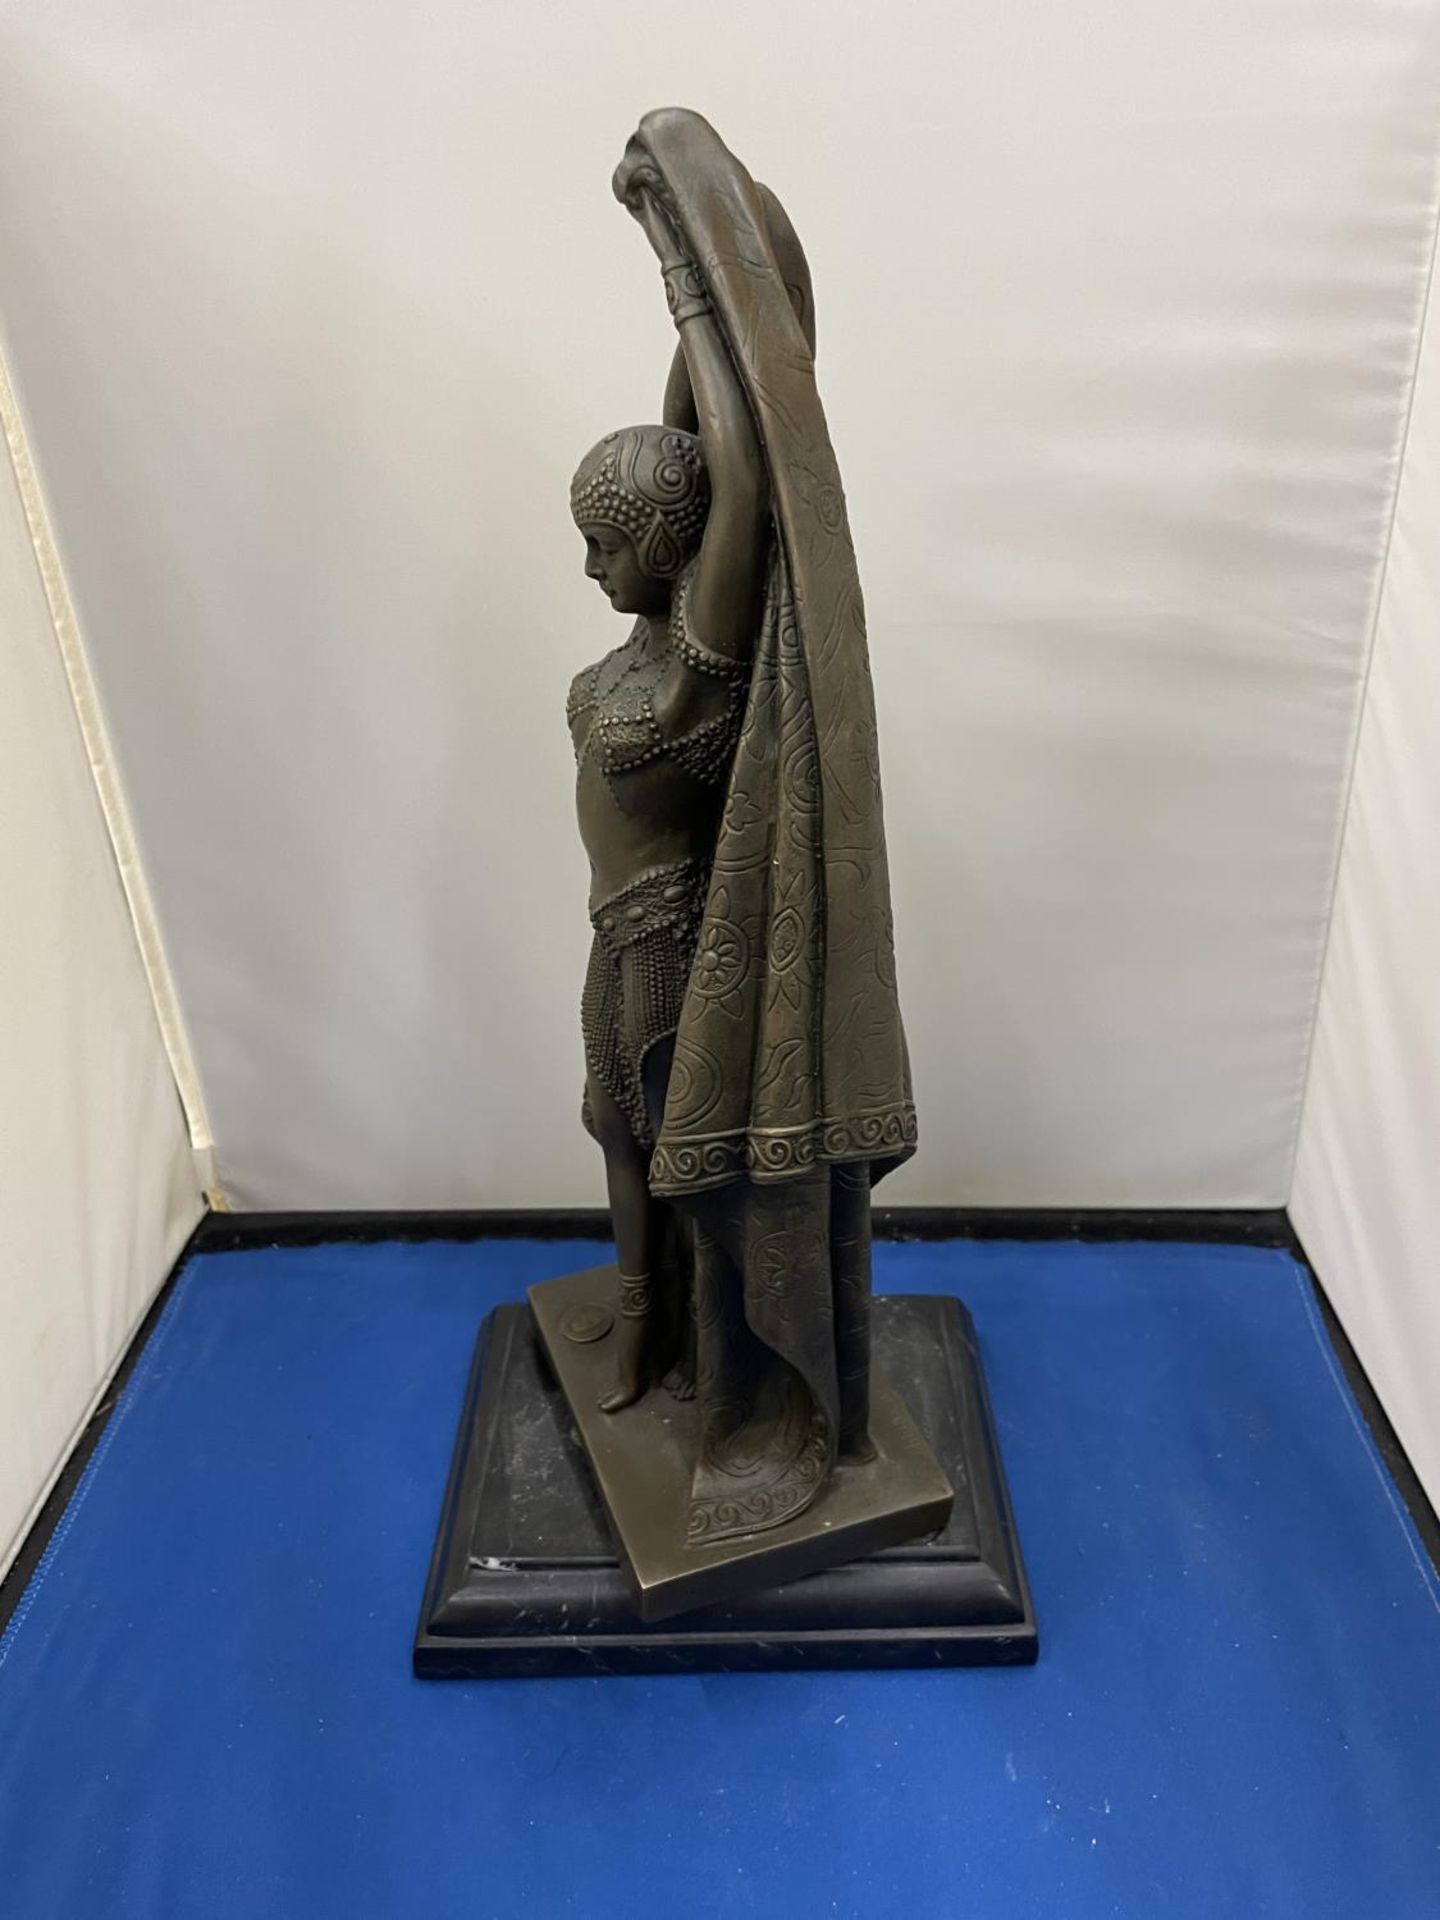 A ART NOUVEAU STYLE BRONZE AFTER DEMETRE CHIPARUS RAMESE'S ENTERTAINER DANCER ART WITH STAMP - Image 3 of 12